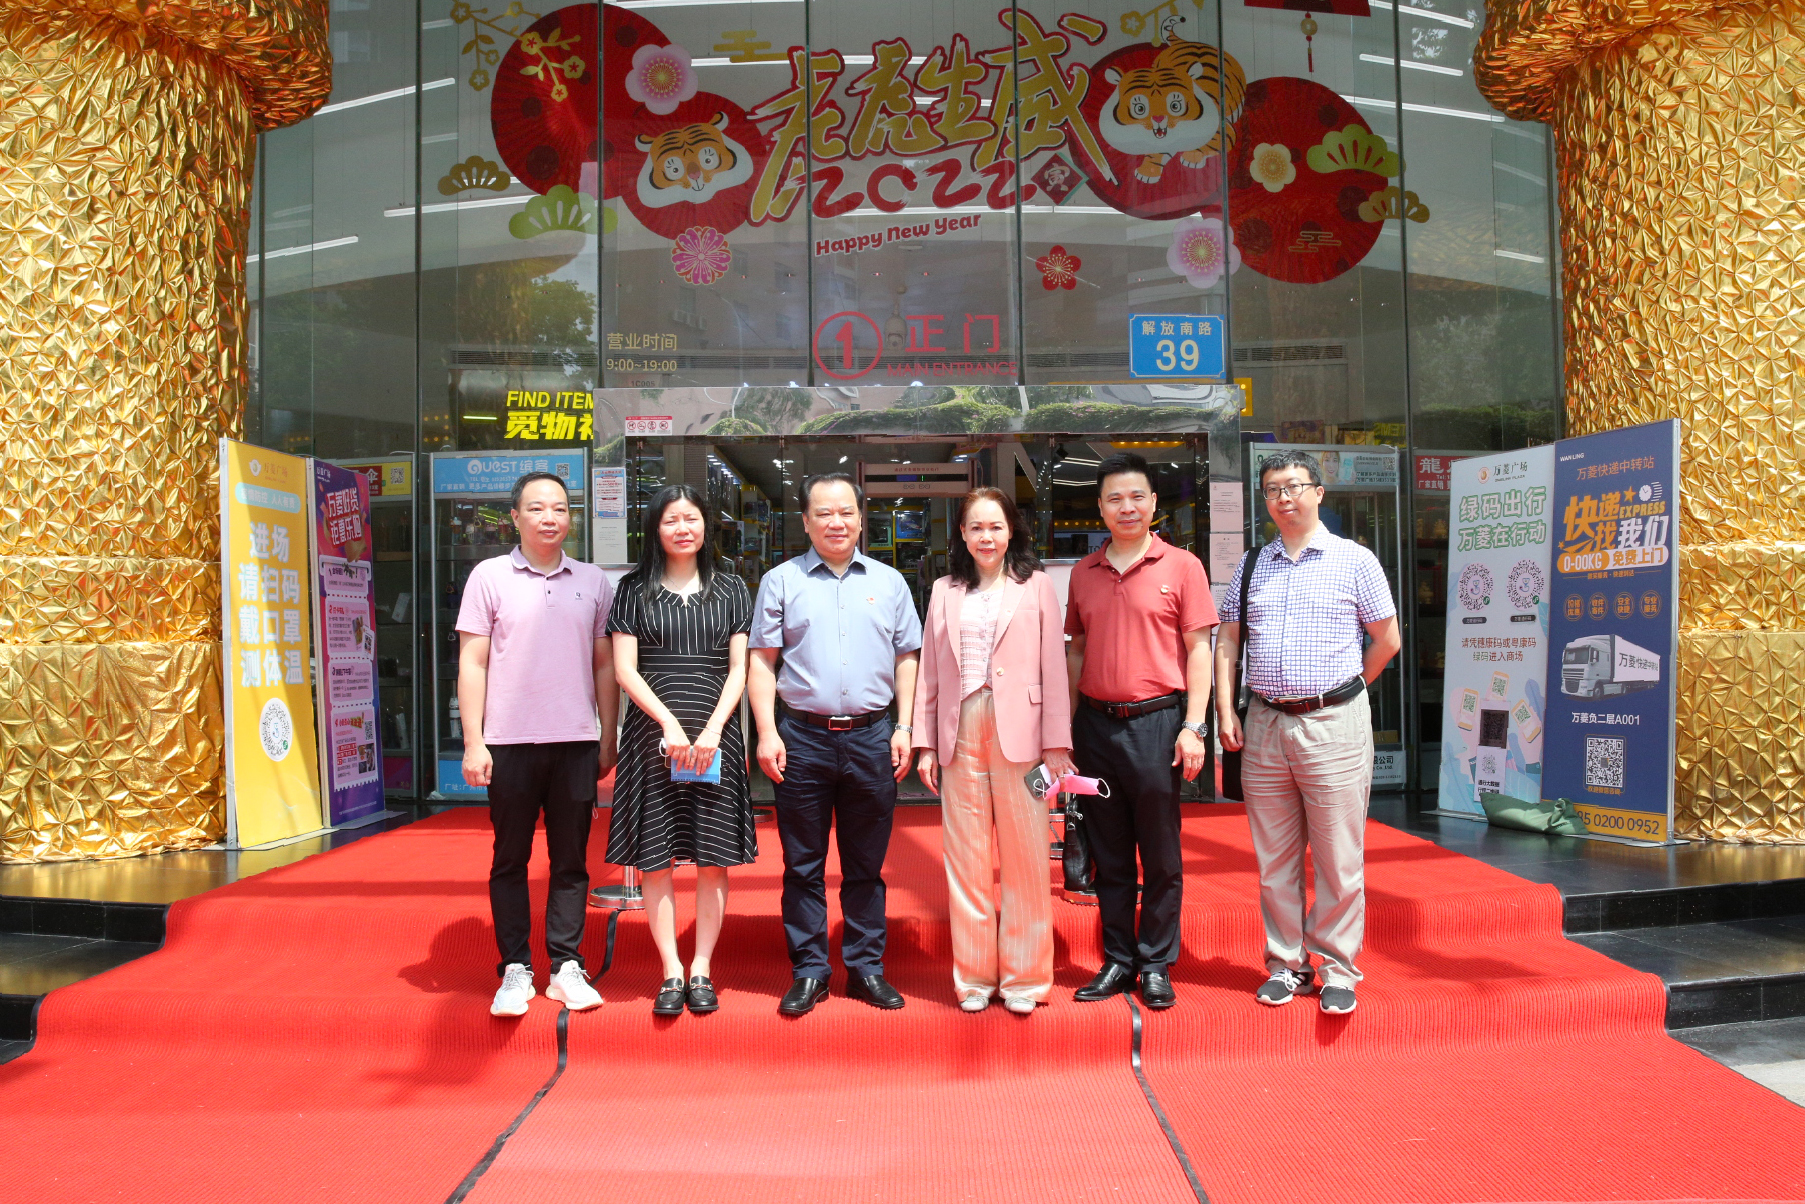 A group of leaders from the private Hualian college visited Yide business district to carry out business visits and research activities